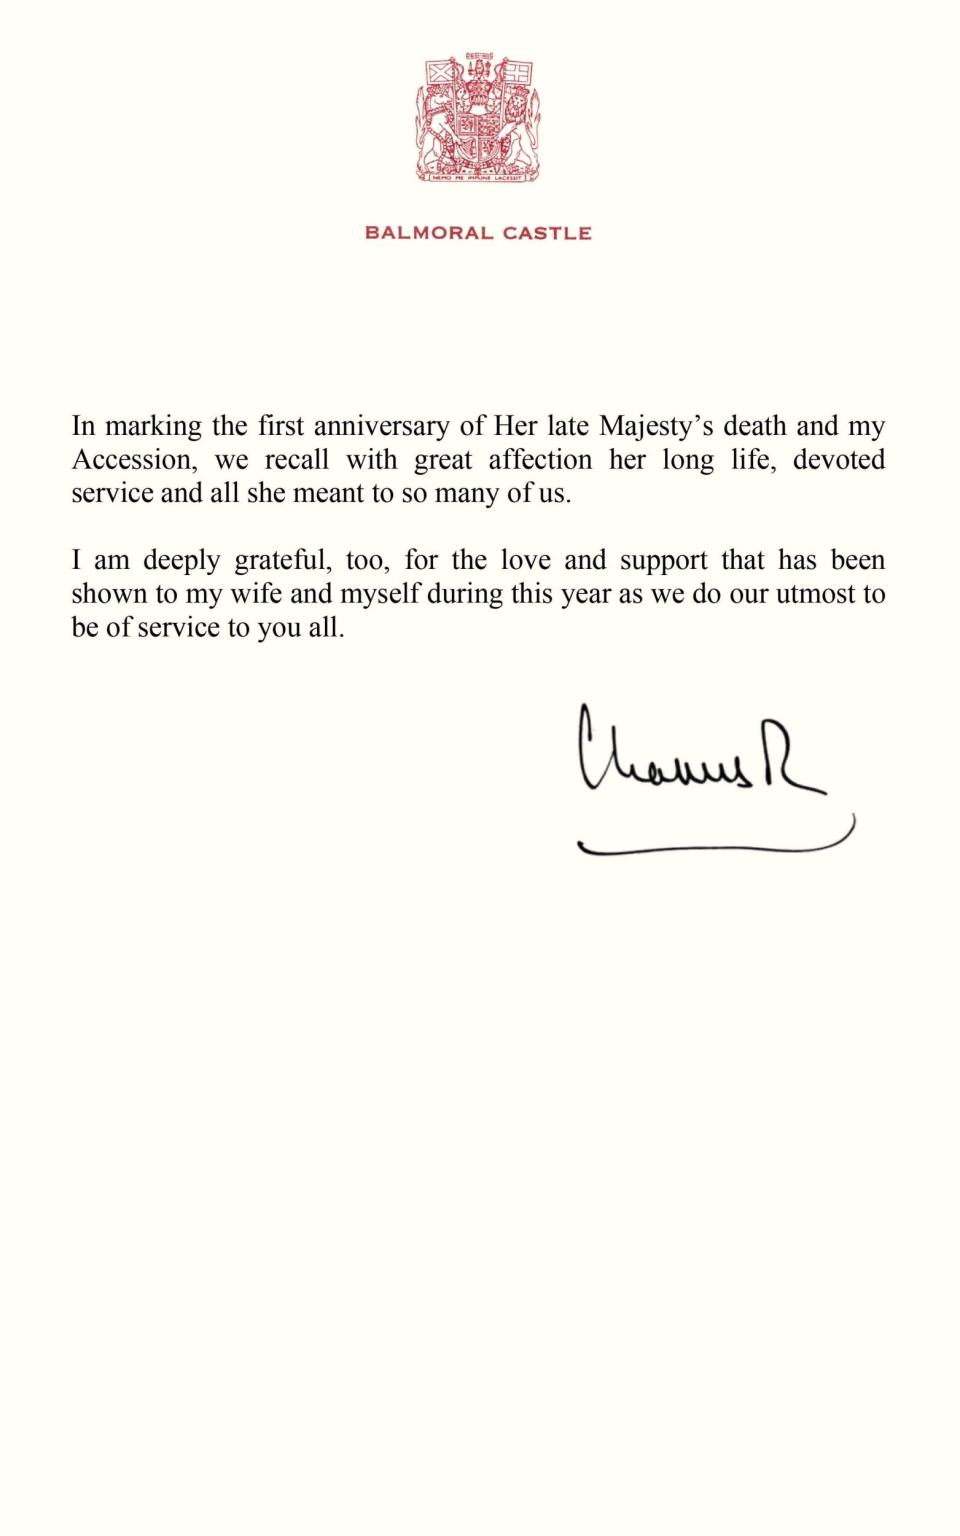 Handout image issued by Buckingham Palace of the message written by King Charles III on the first anniversary of the late Queen Elizabeth II's passing